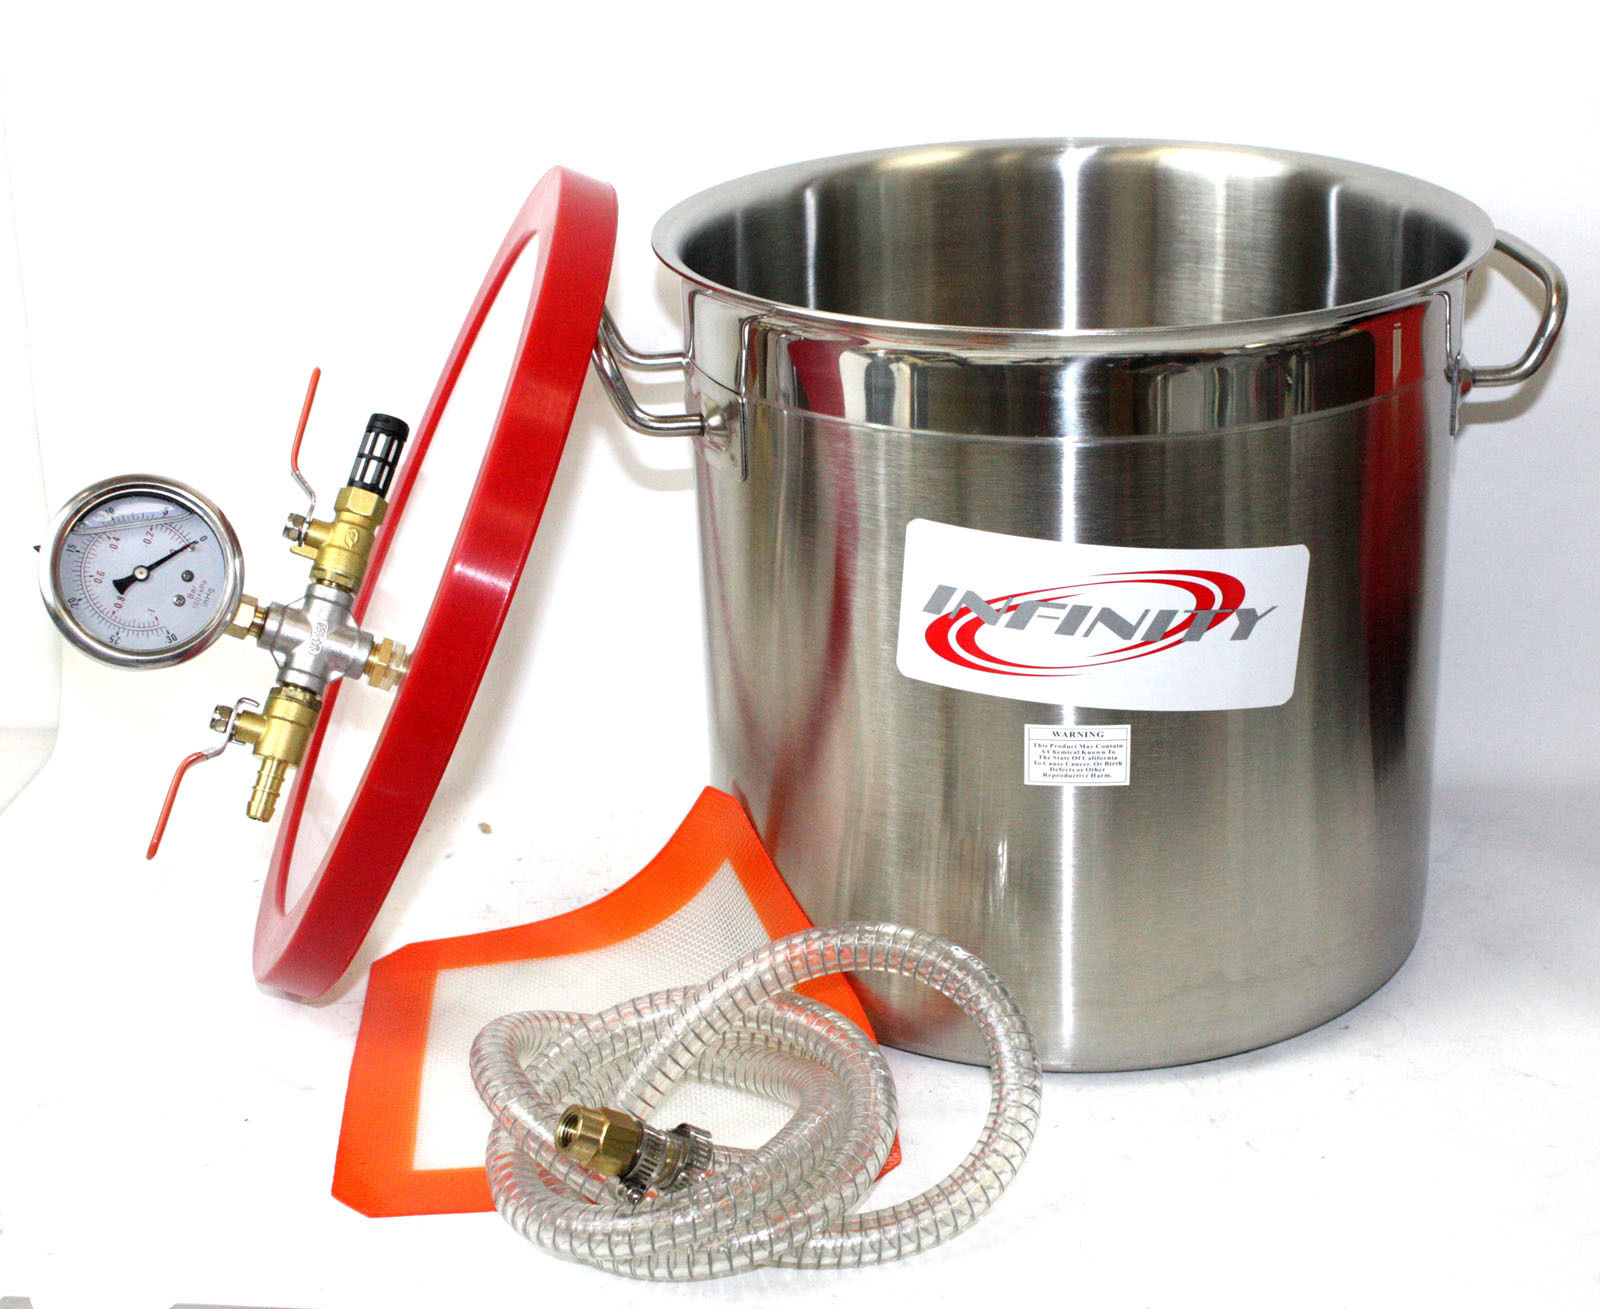 3 Gallon, Without Pump Vacuum Chamber Stainless Steel Airtight Barrel with Glycerin Filled Vacuum Gauge for Resin Casting,Degassing Urethanes Silicone,Essential Oils,Stabilizing Wood 